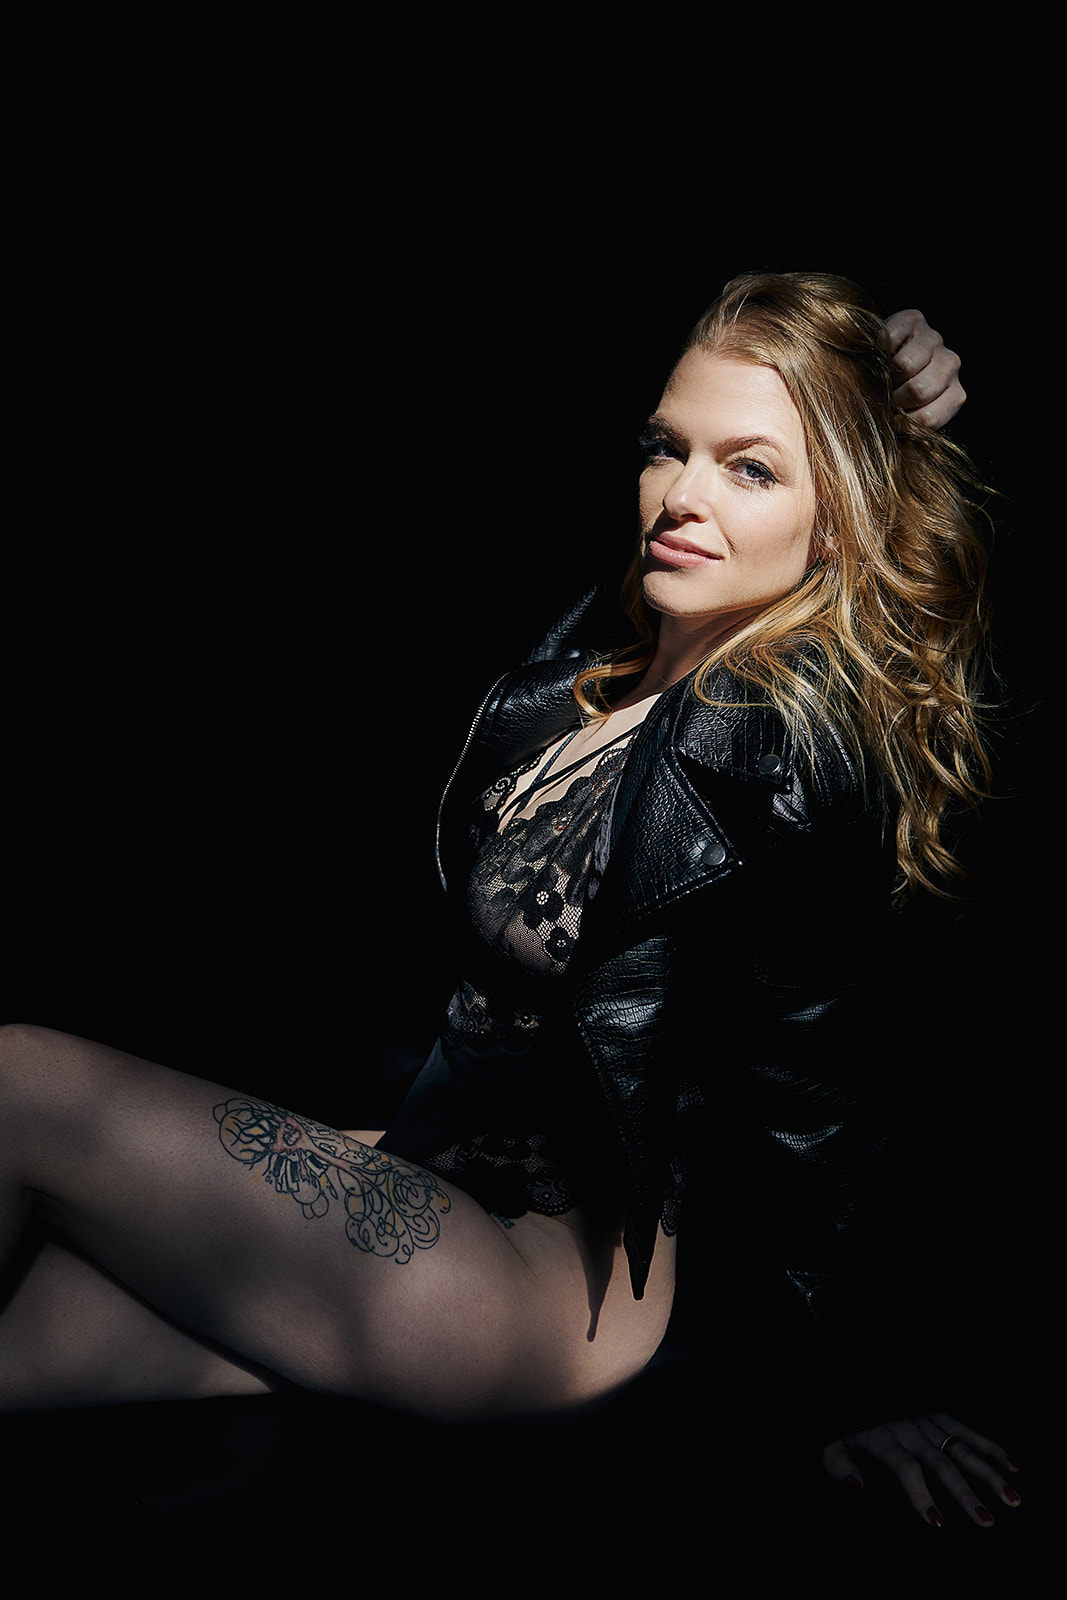 Boudoir photograph of a woman with red hair sitting on the ground in the sun wearing a black leather jacket and lace